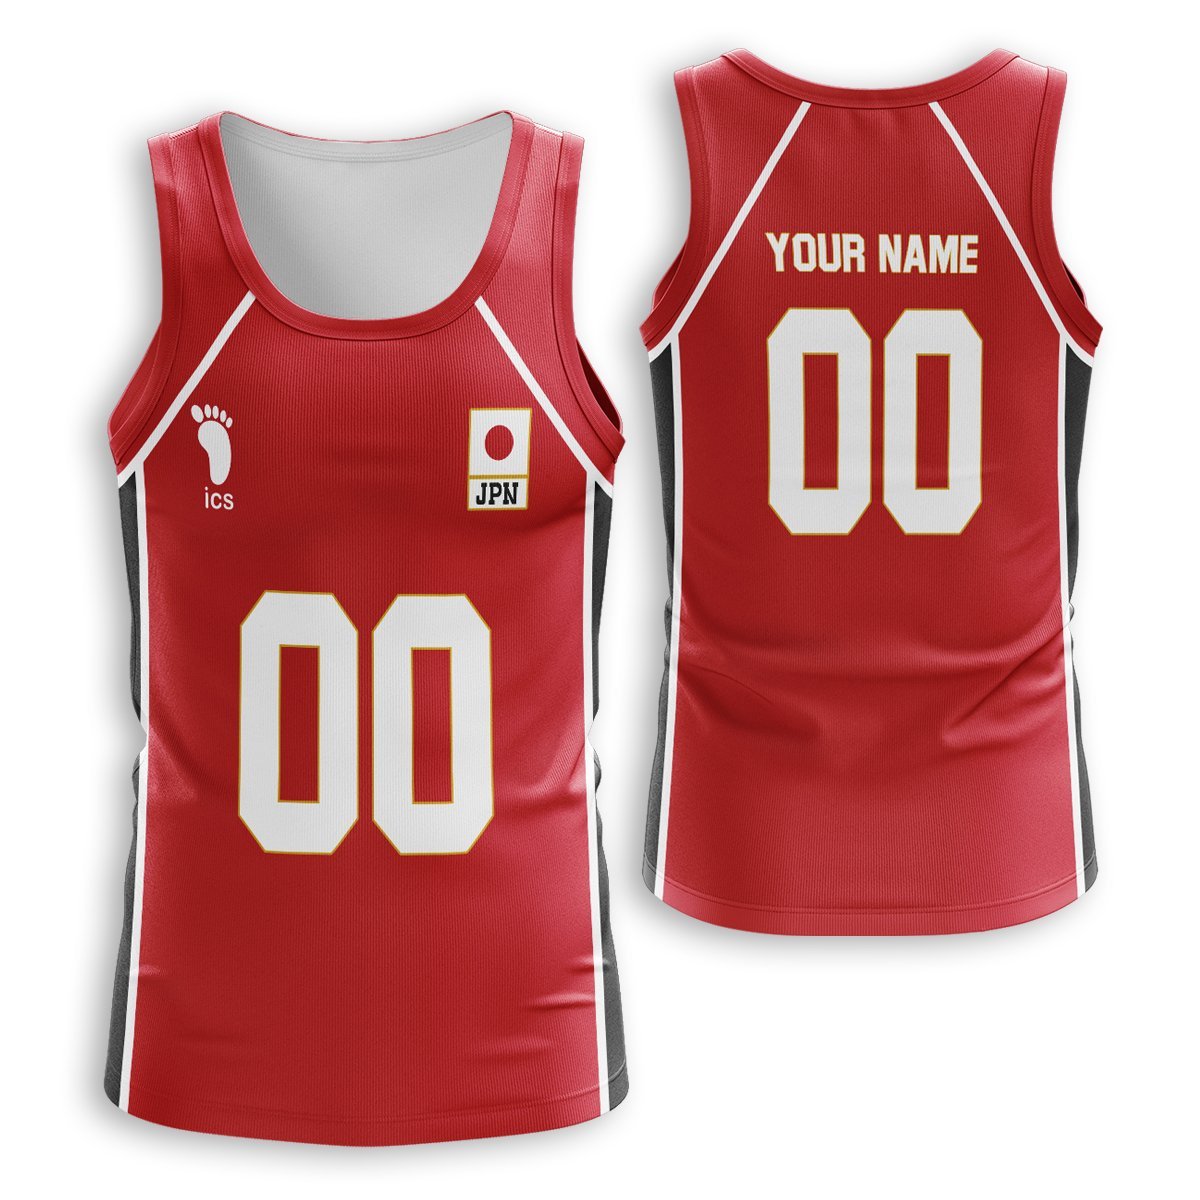 Personalized Haikyuu National Team Unisex Tank Tops FDM3107 S Official Anime Swimsuit Merch